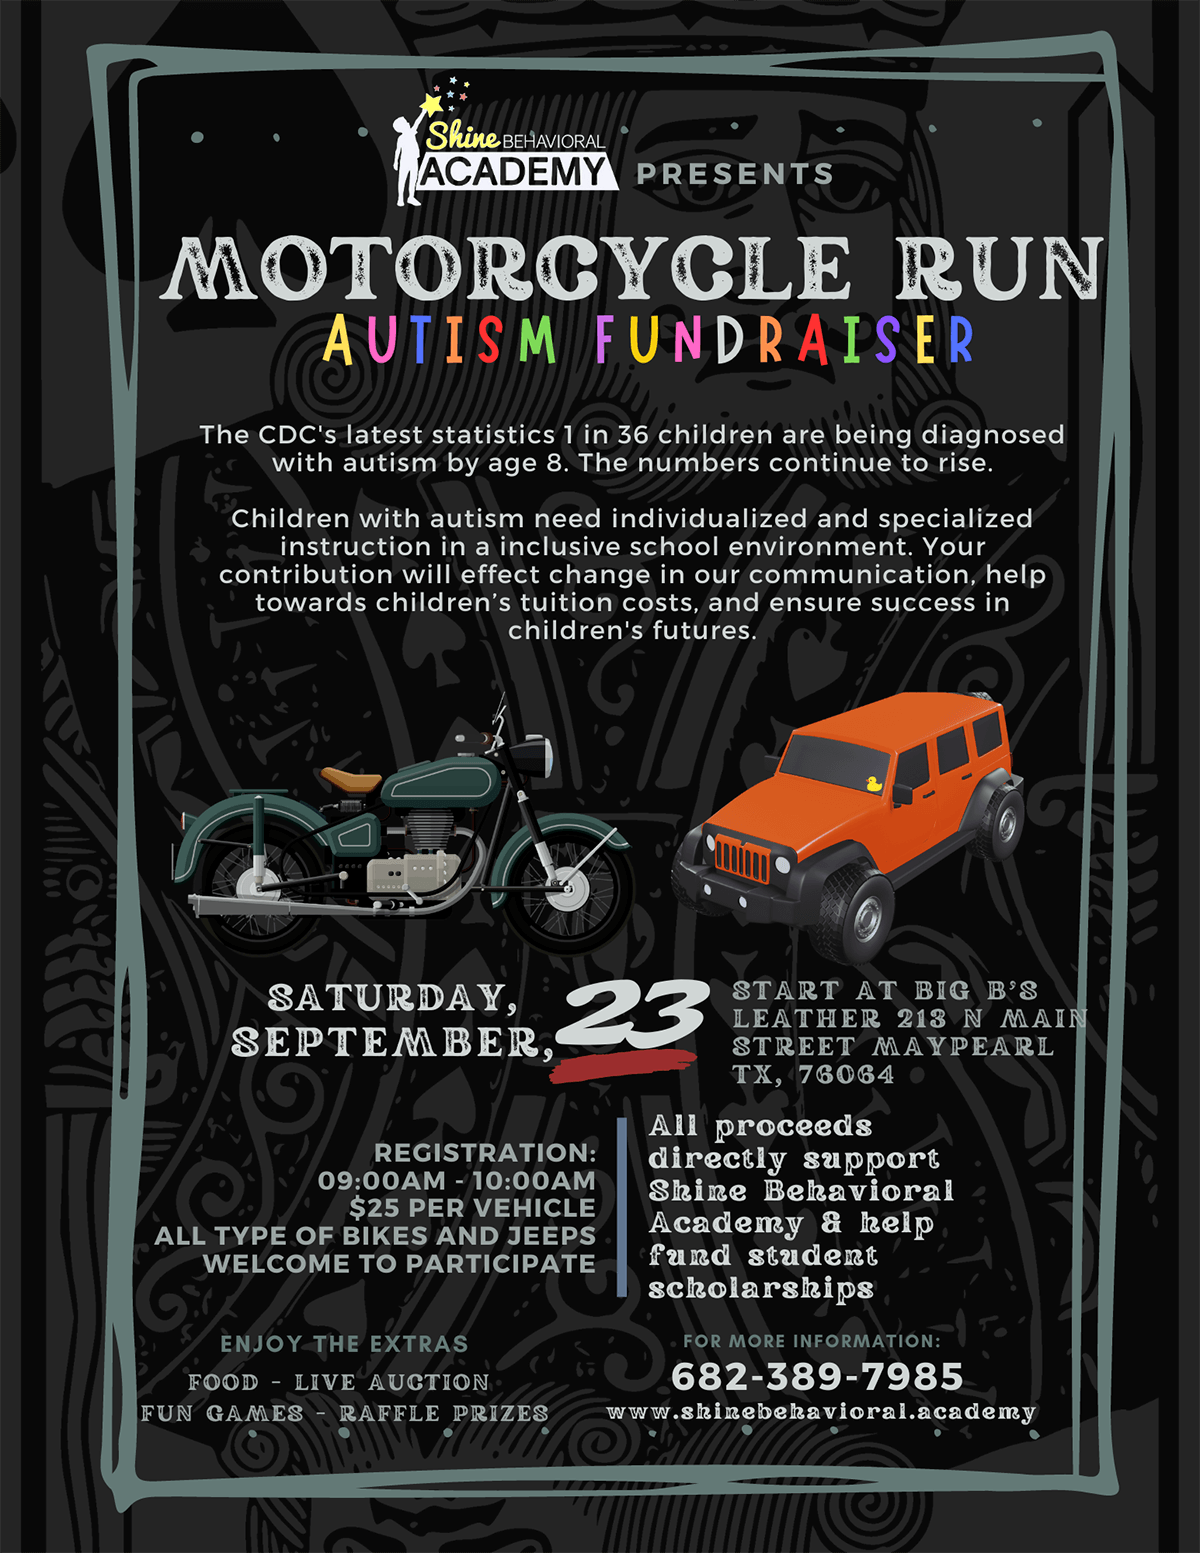 Motorcycle Run Autism Fundraiser Event!